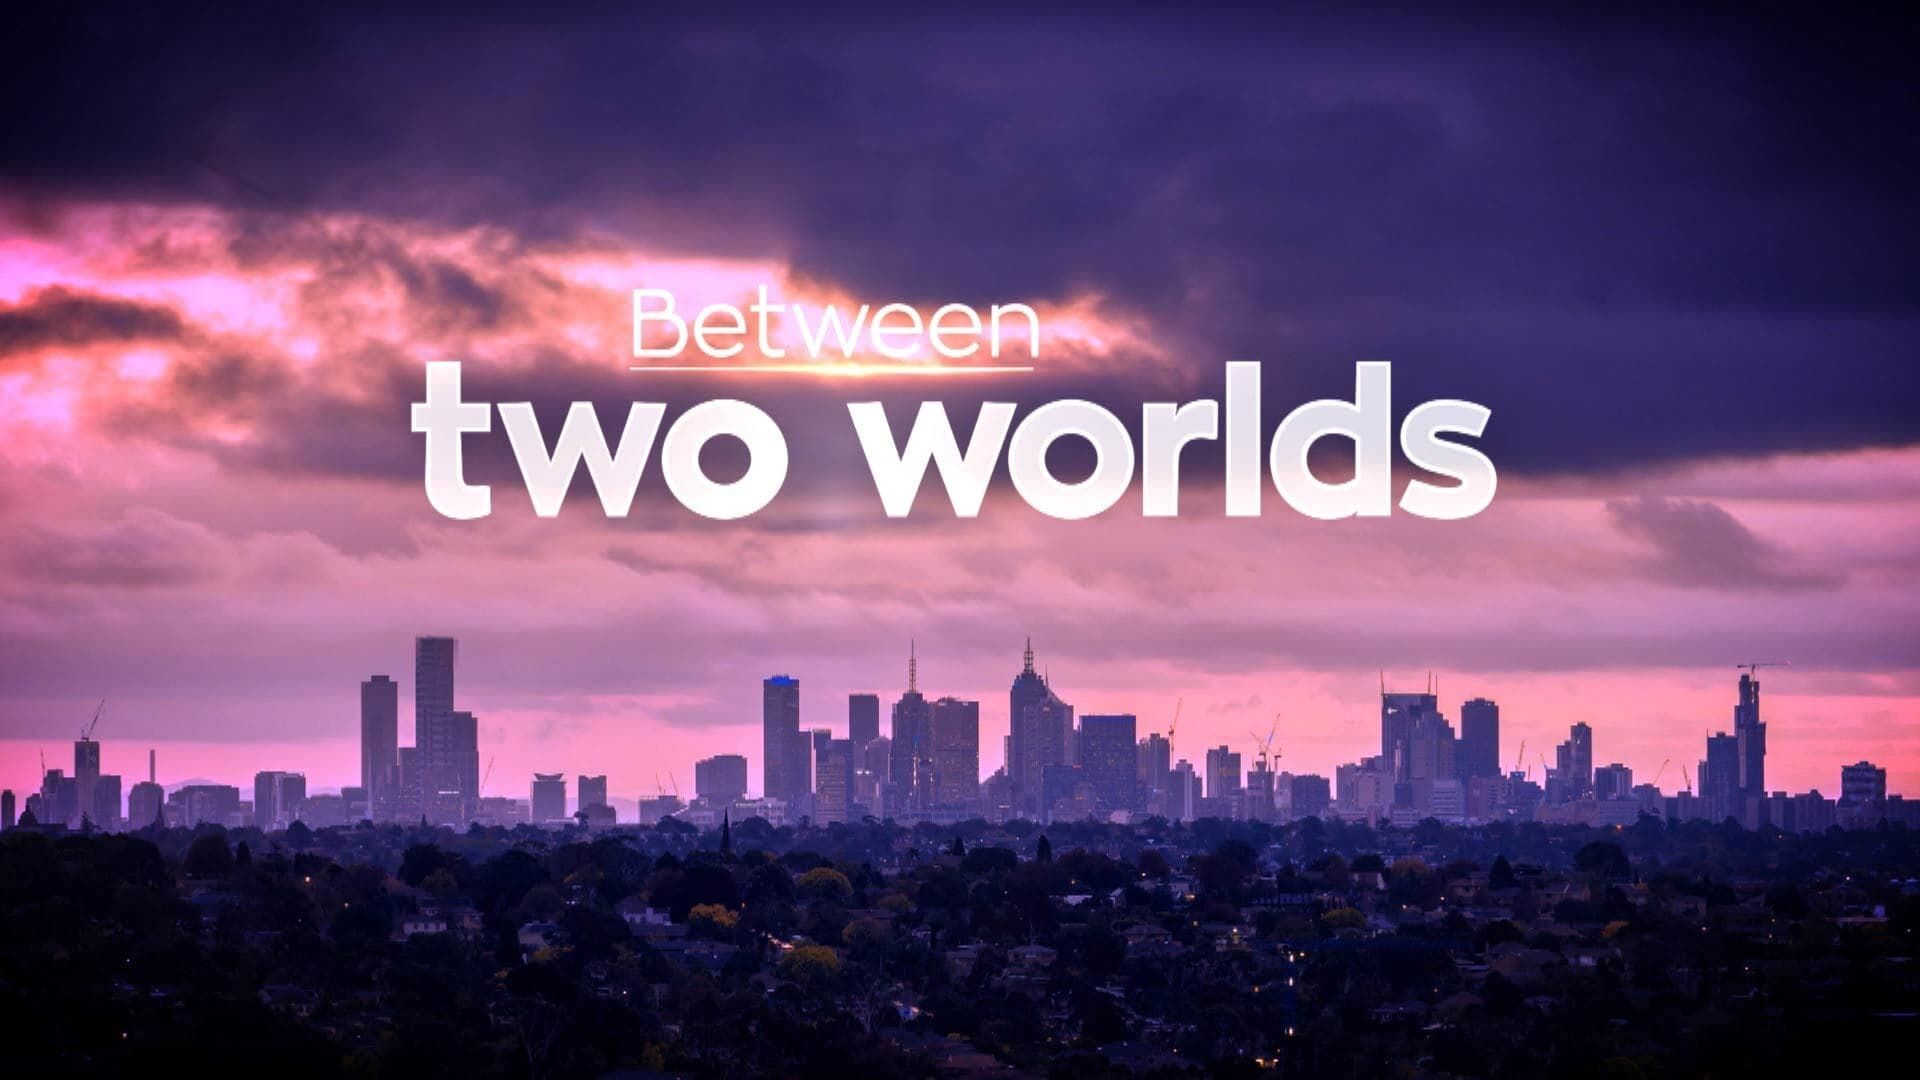 Between Two Worlds background